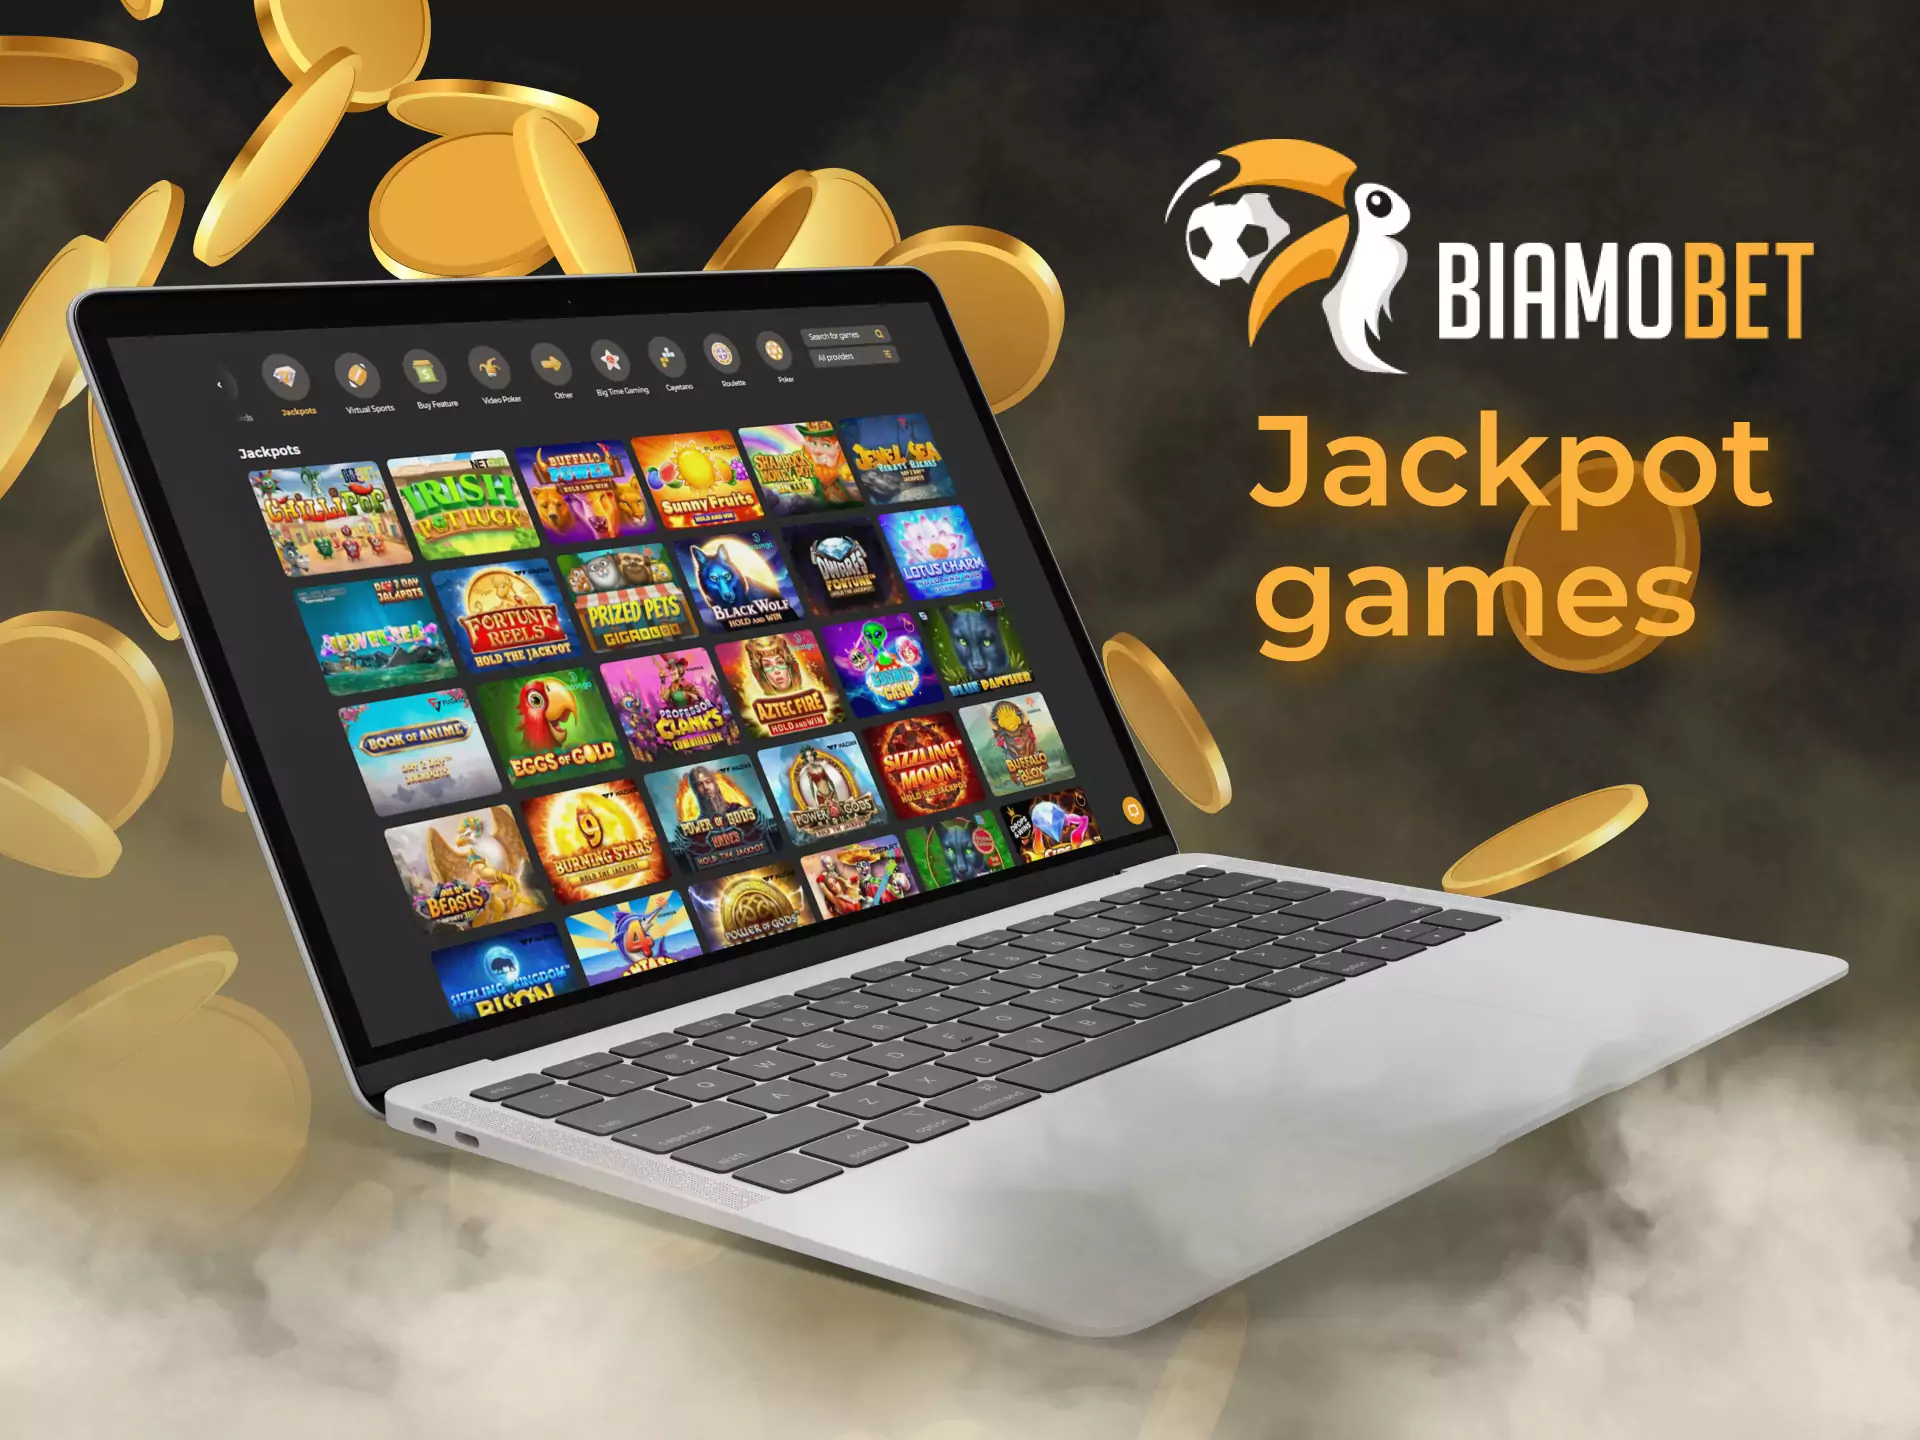 In the jackpot games on Biamobet, you can win huge prizes with no efforts.